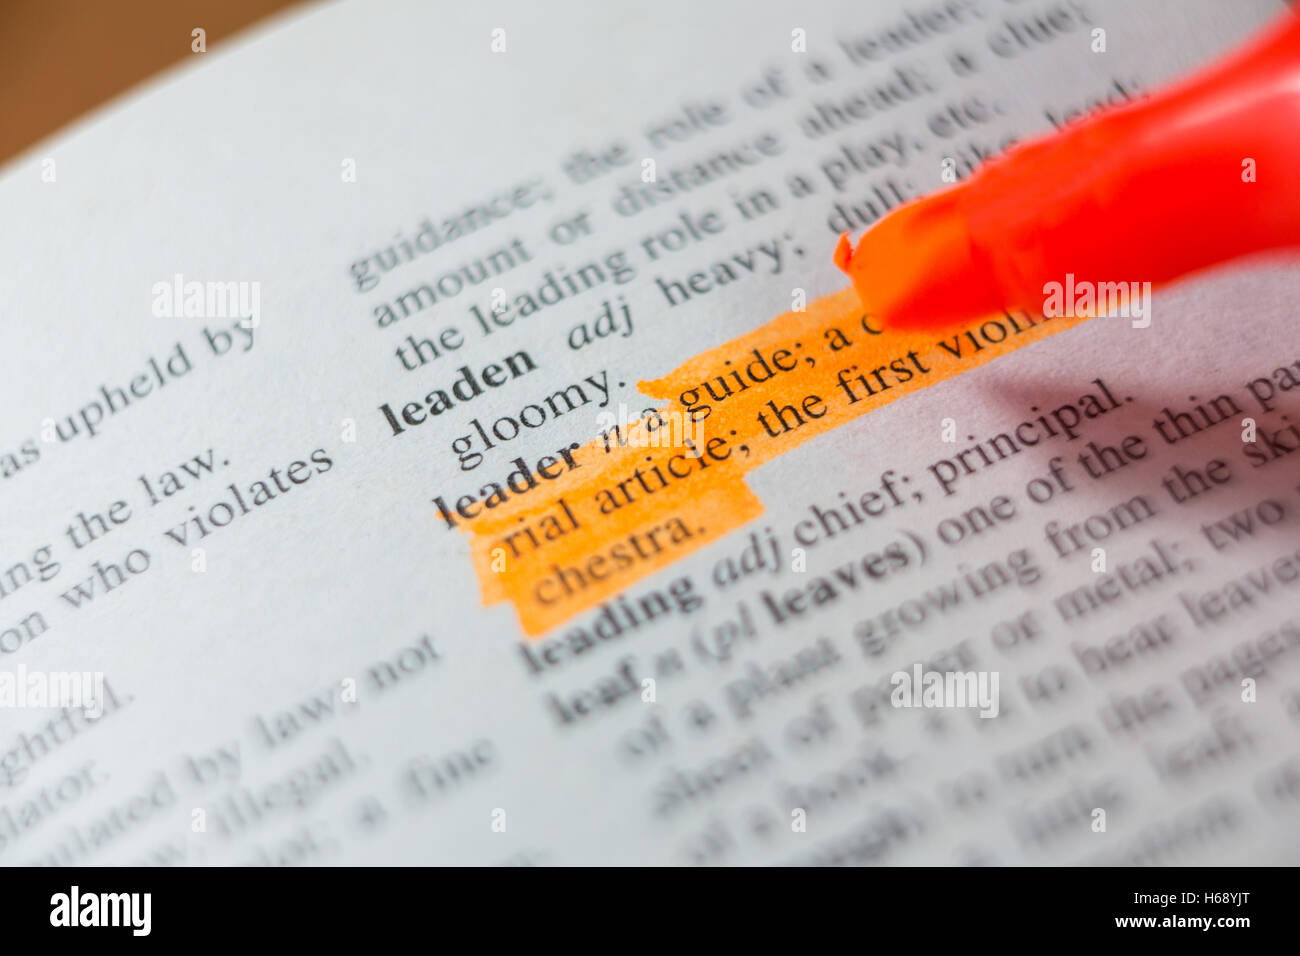 Close-up of marker pen highlighting text Stock Photo